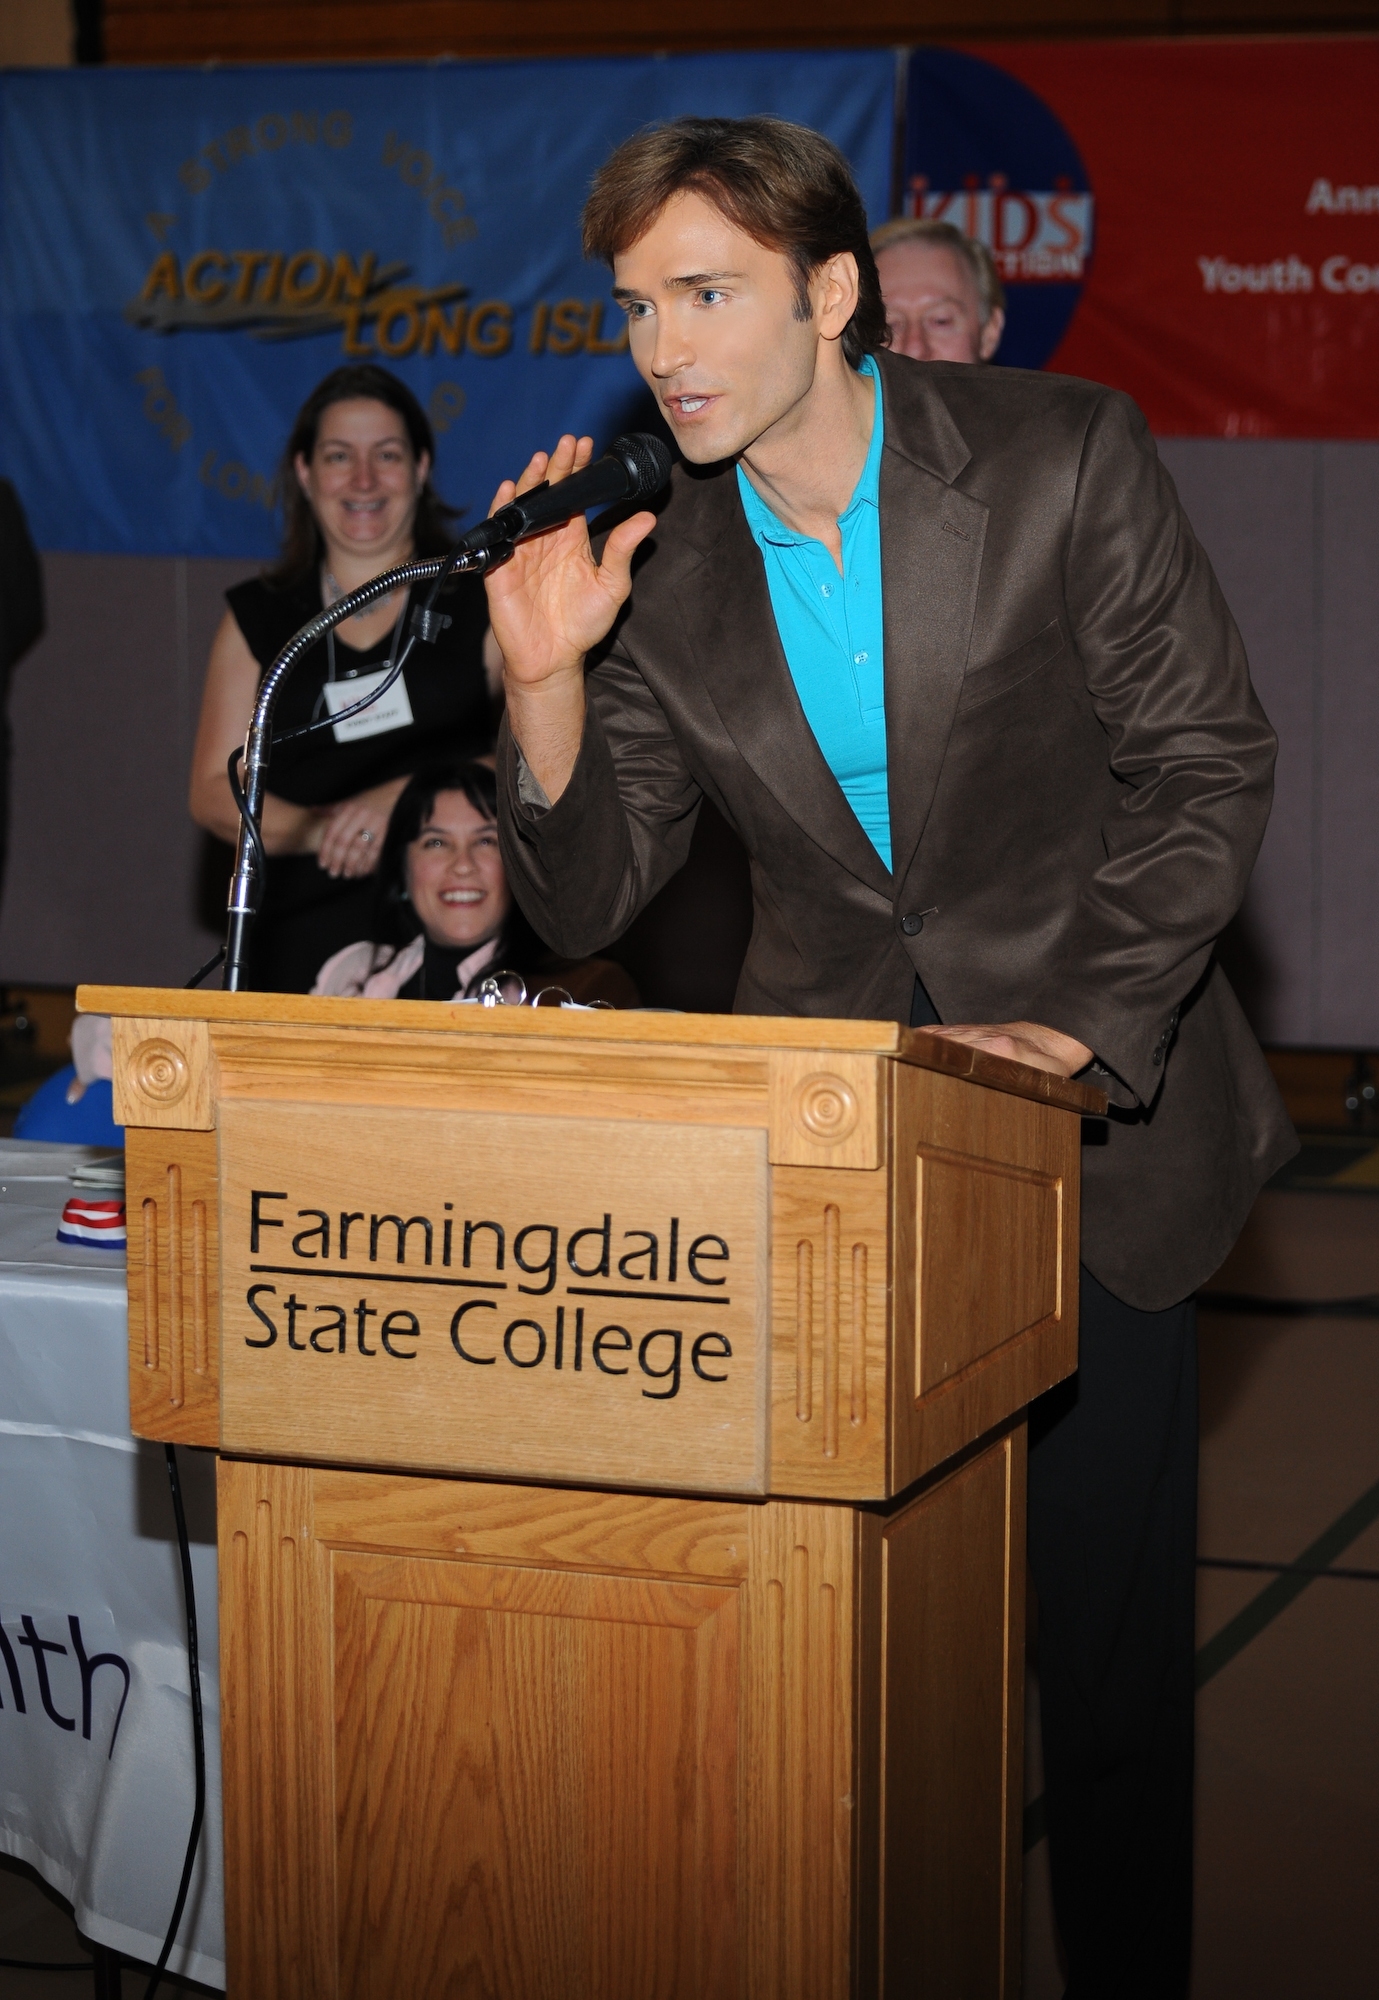 Speaking at a Kids In Action event